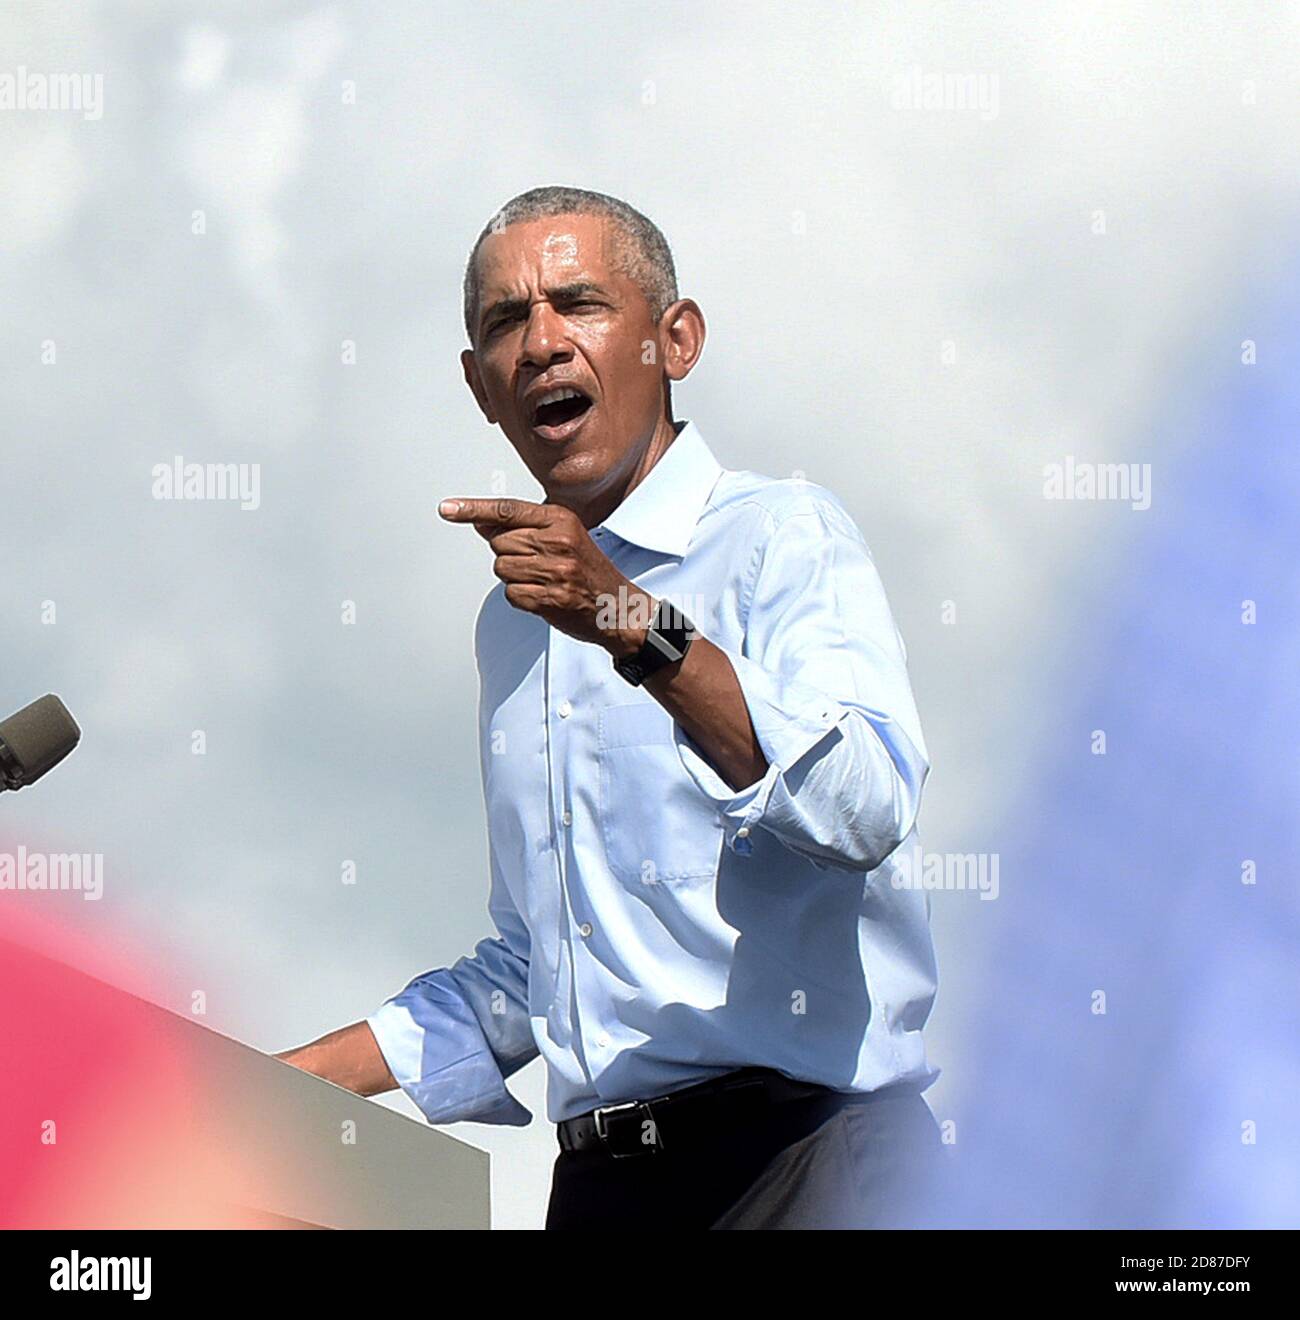 October 27, 2020 - Orlando, Florida, United States - Former U.S. President Barack Obama speaks in support of Democratic presidential nominee Joe Biden during a drive-in rally on October 27, 2020 in Orlando, Florida. Mr. Obama is campaigning for his former Vice President before the Nov. 3rd election. (Paul Hennessy/Alamy) Stock Photo